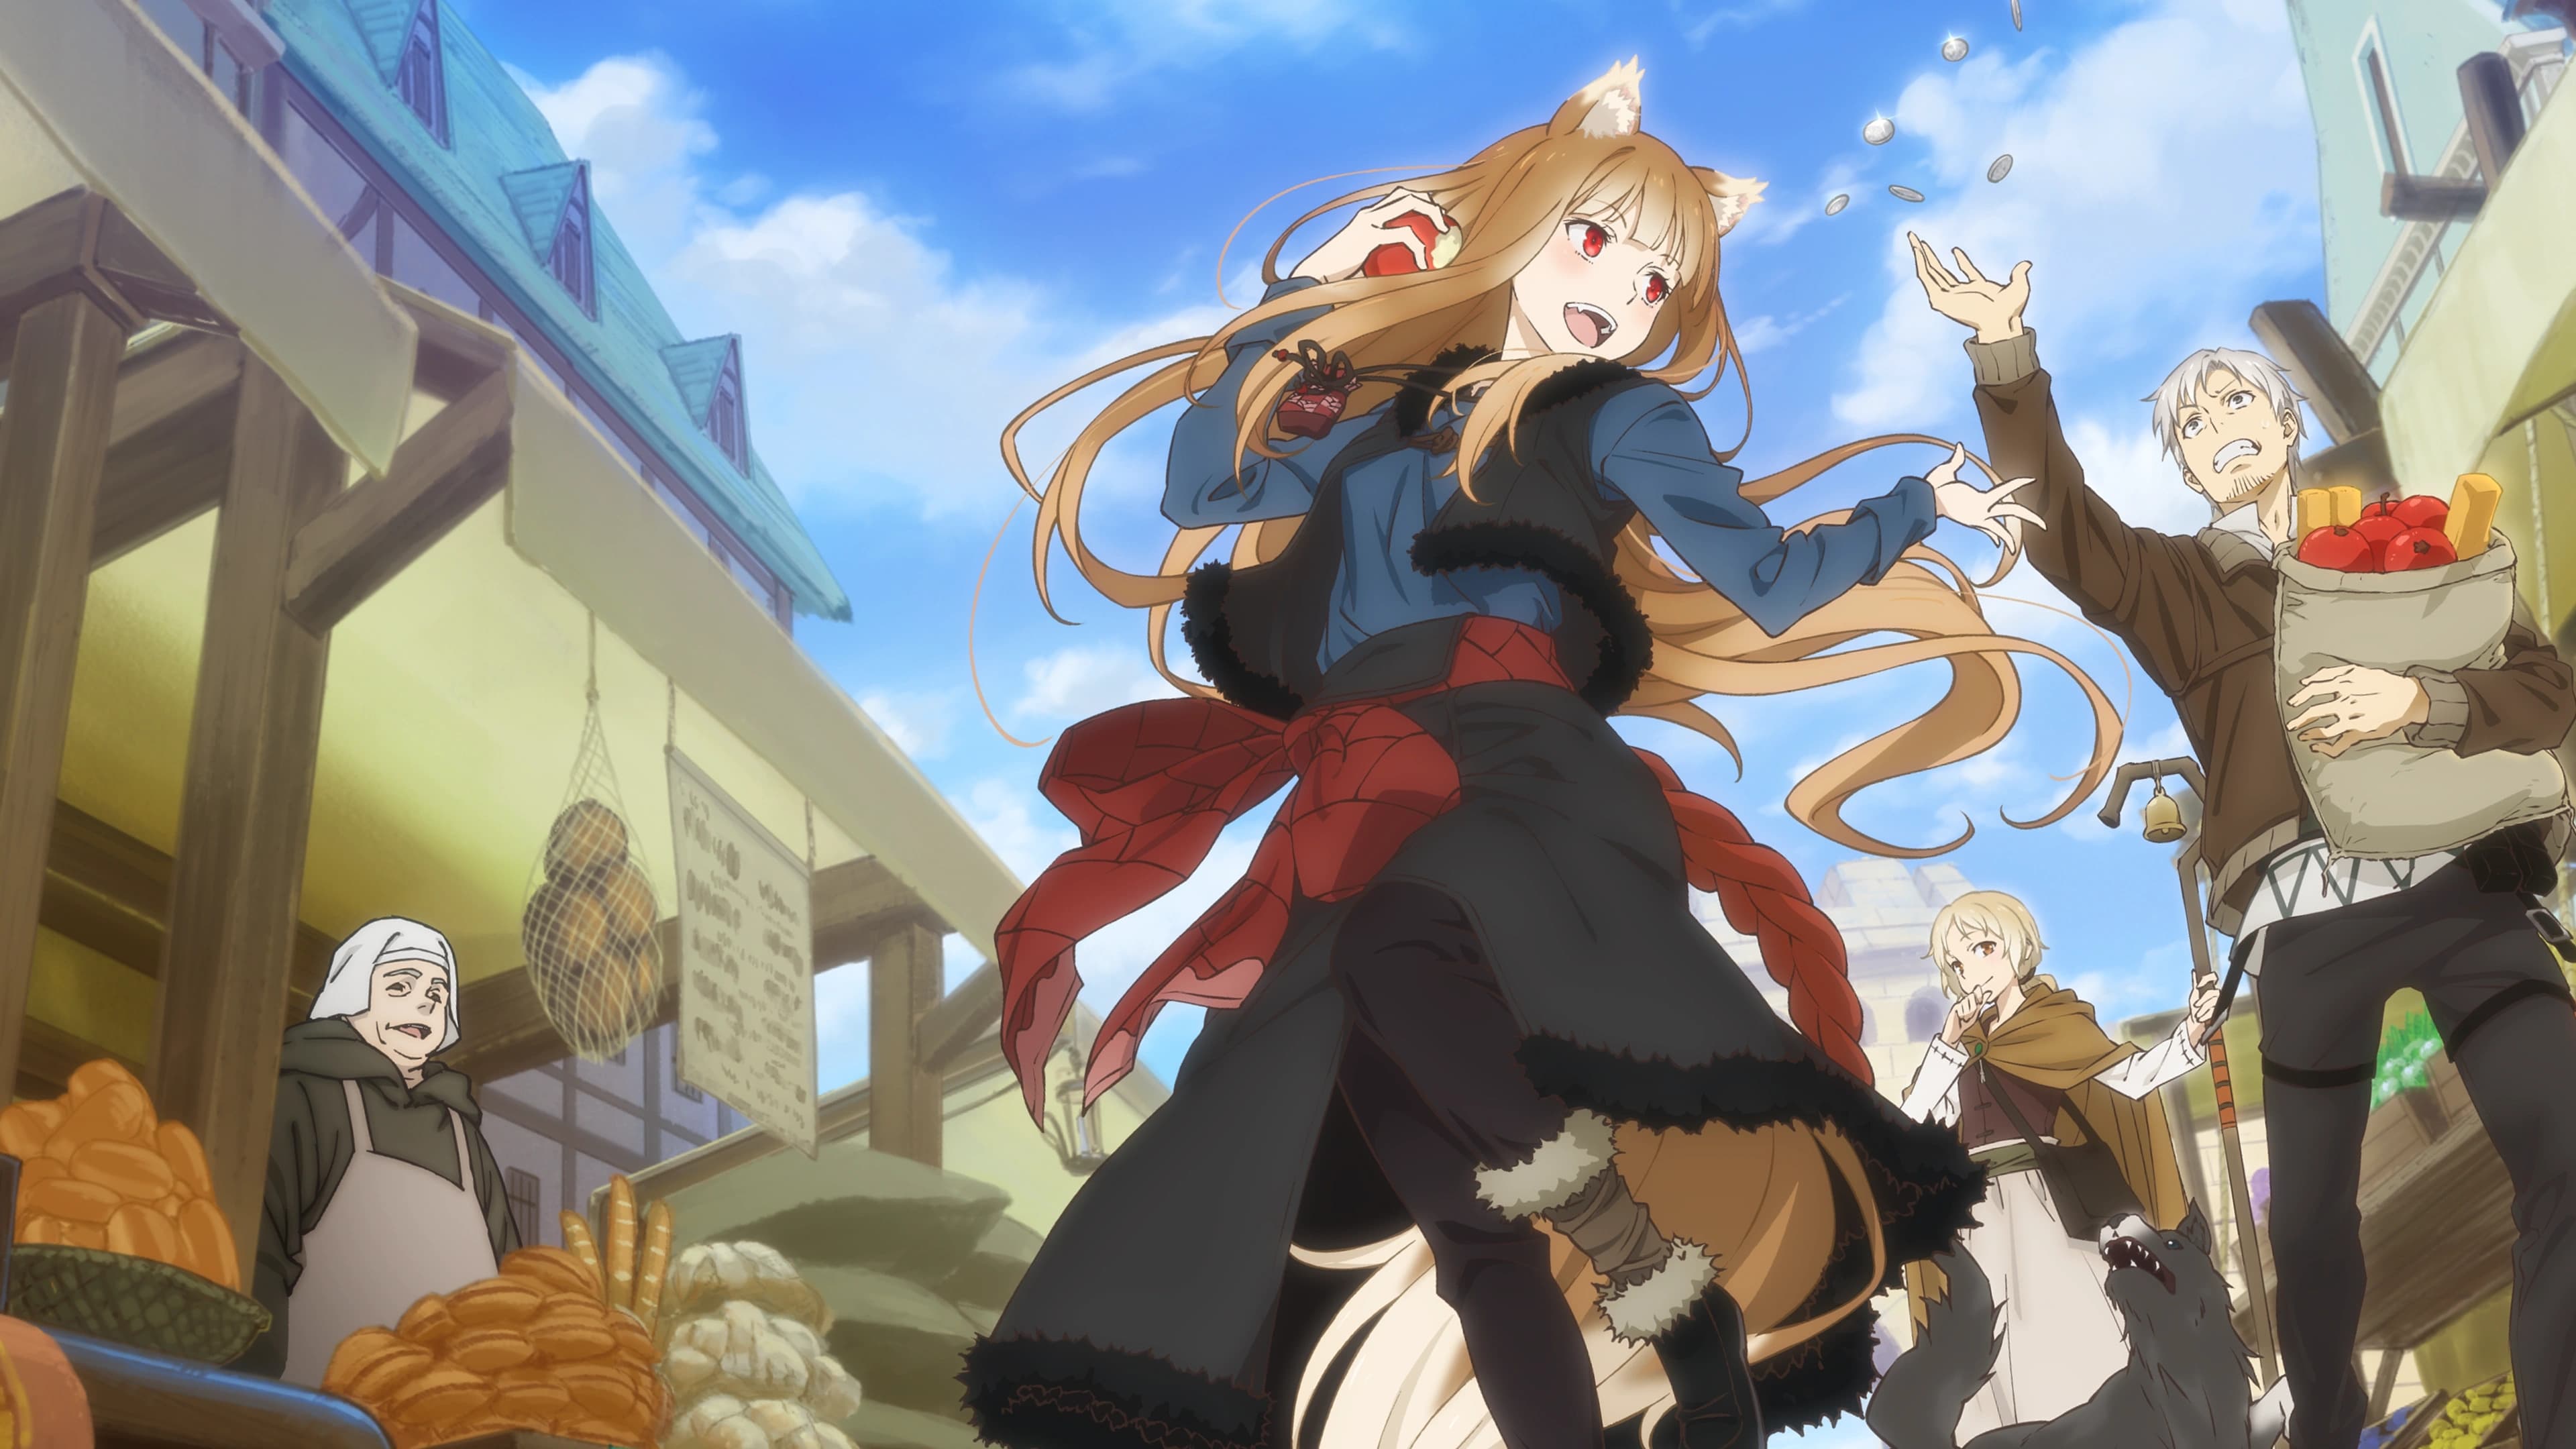 Spice and Wolf: Merchant Meets the Wise Wolf - Season 1 Episode 4